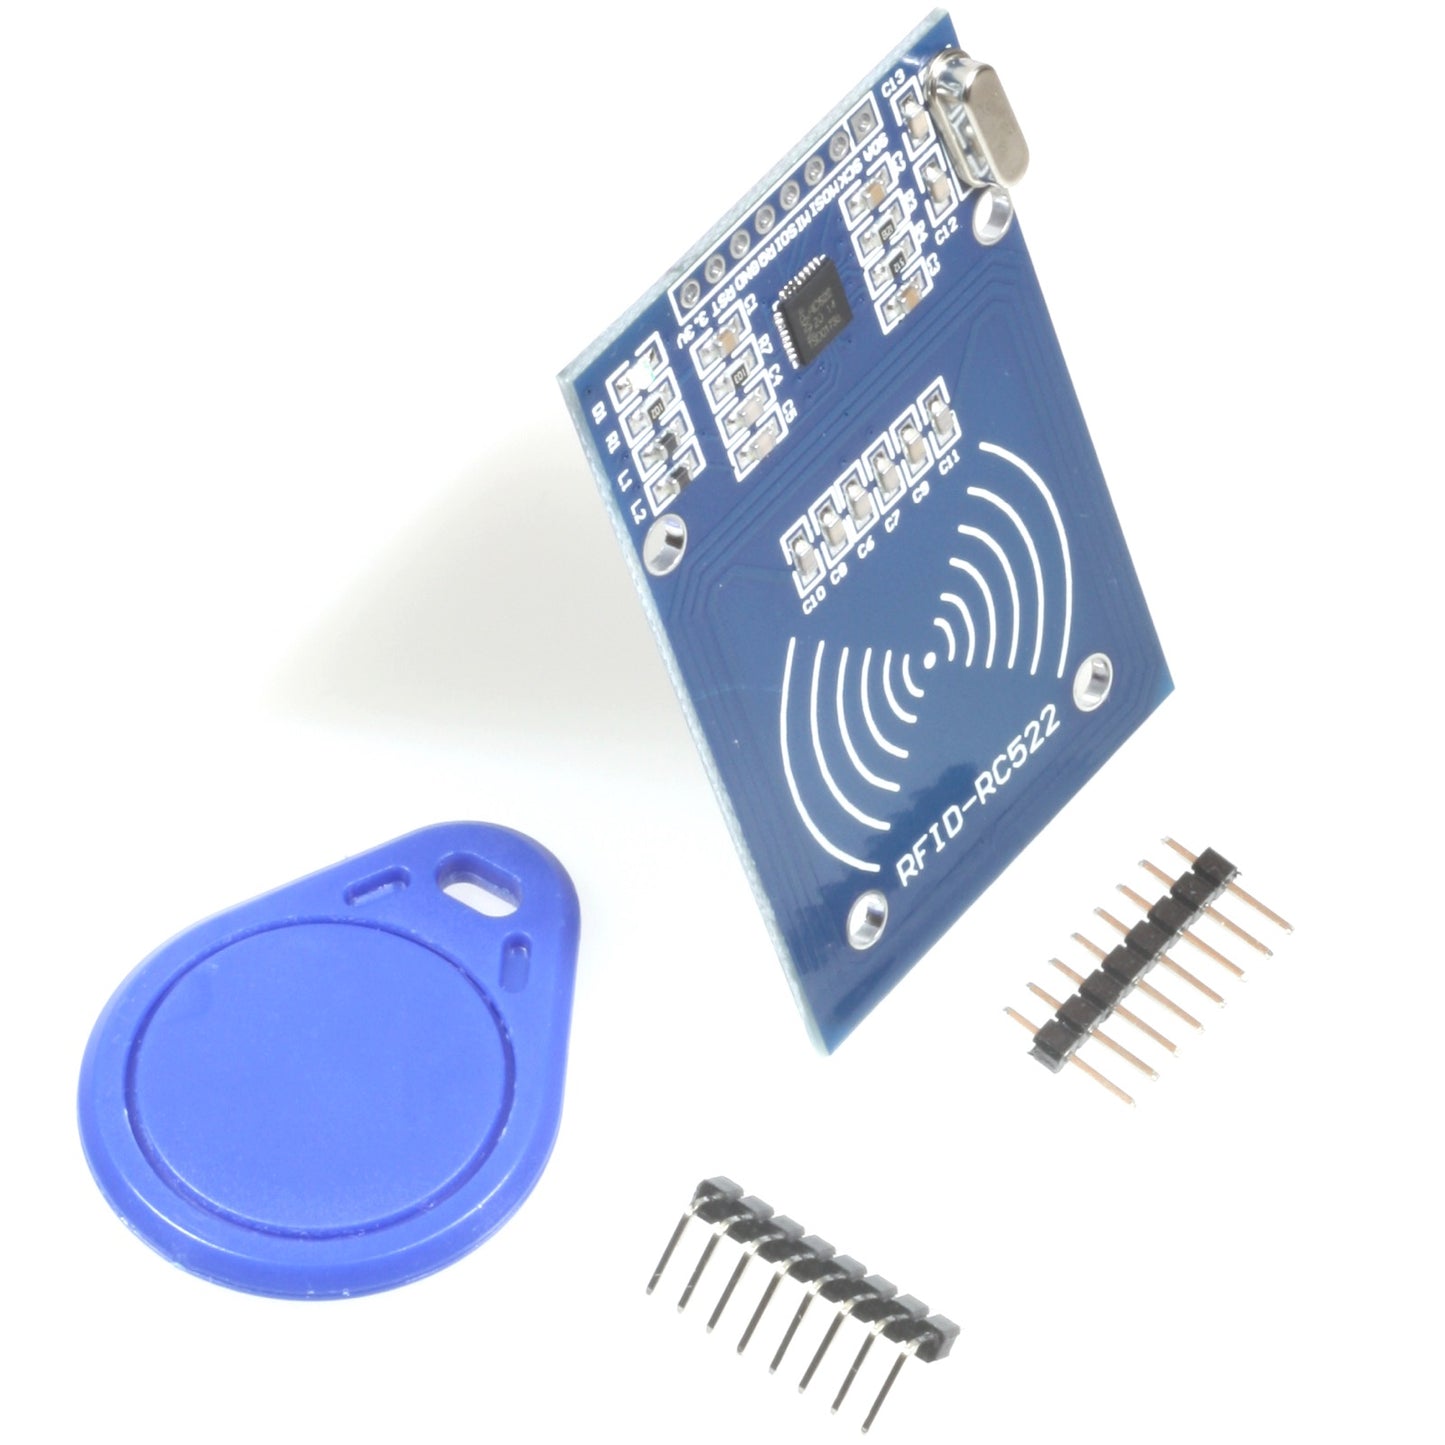 RFID-Kit RC522 with MIFARE Transponder and Card